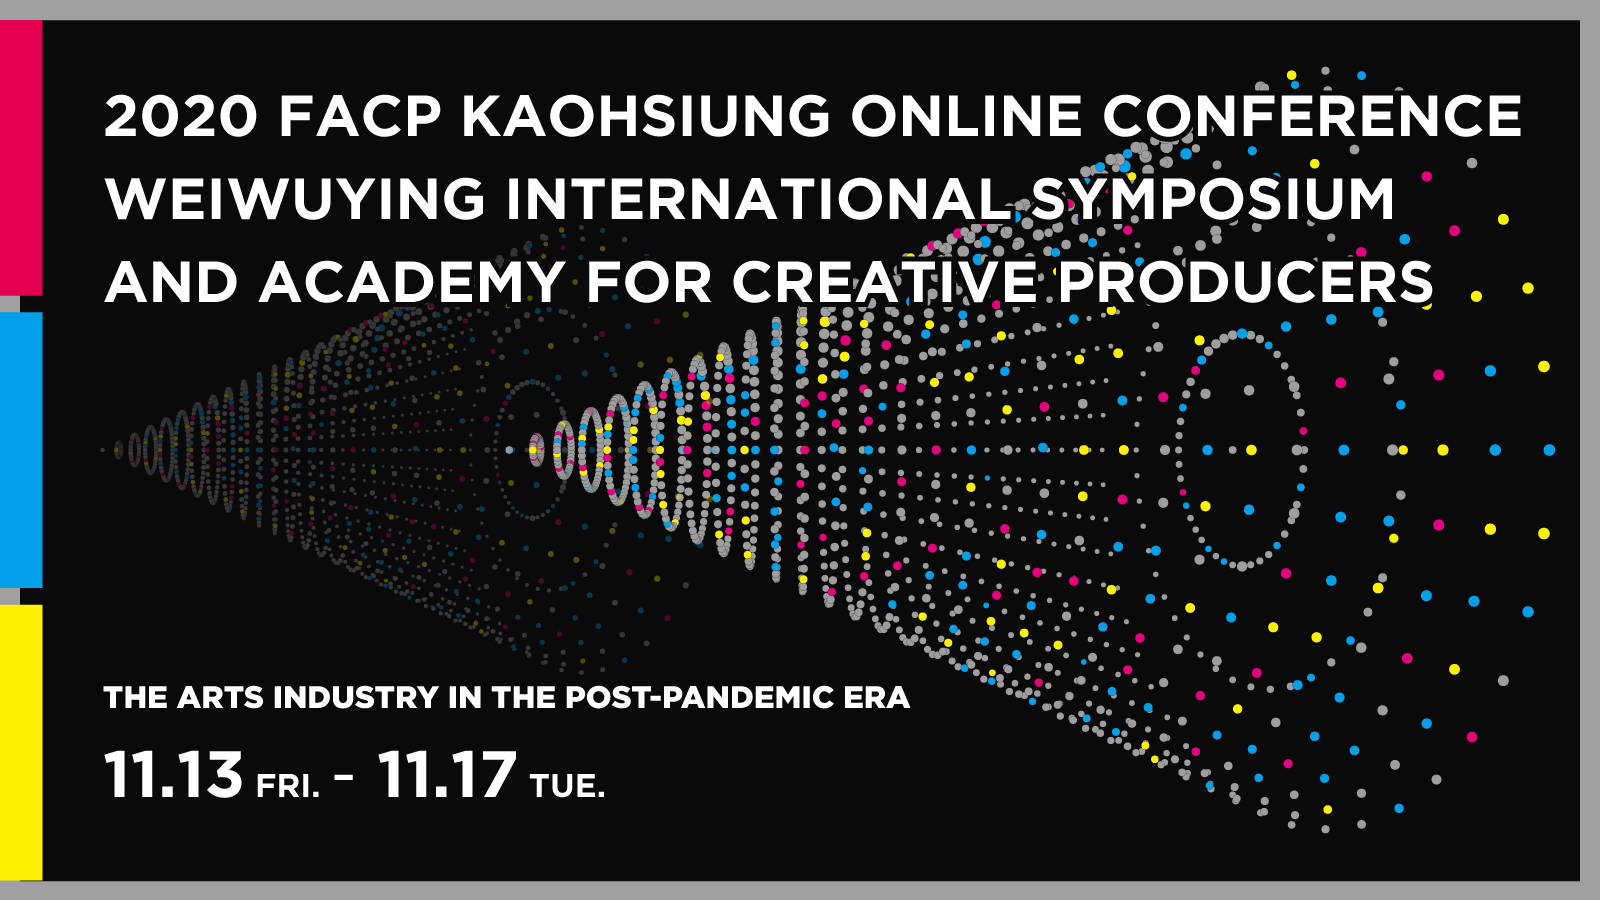 BIG EVENT! 2020 FACP Kaohsiung Online Conference in November